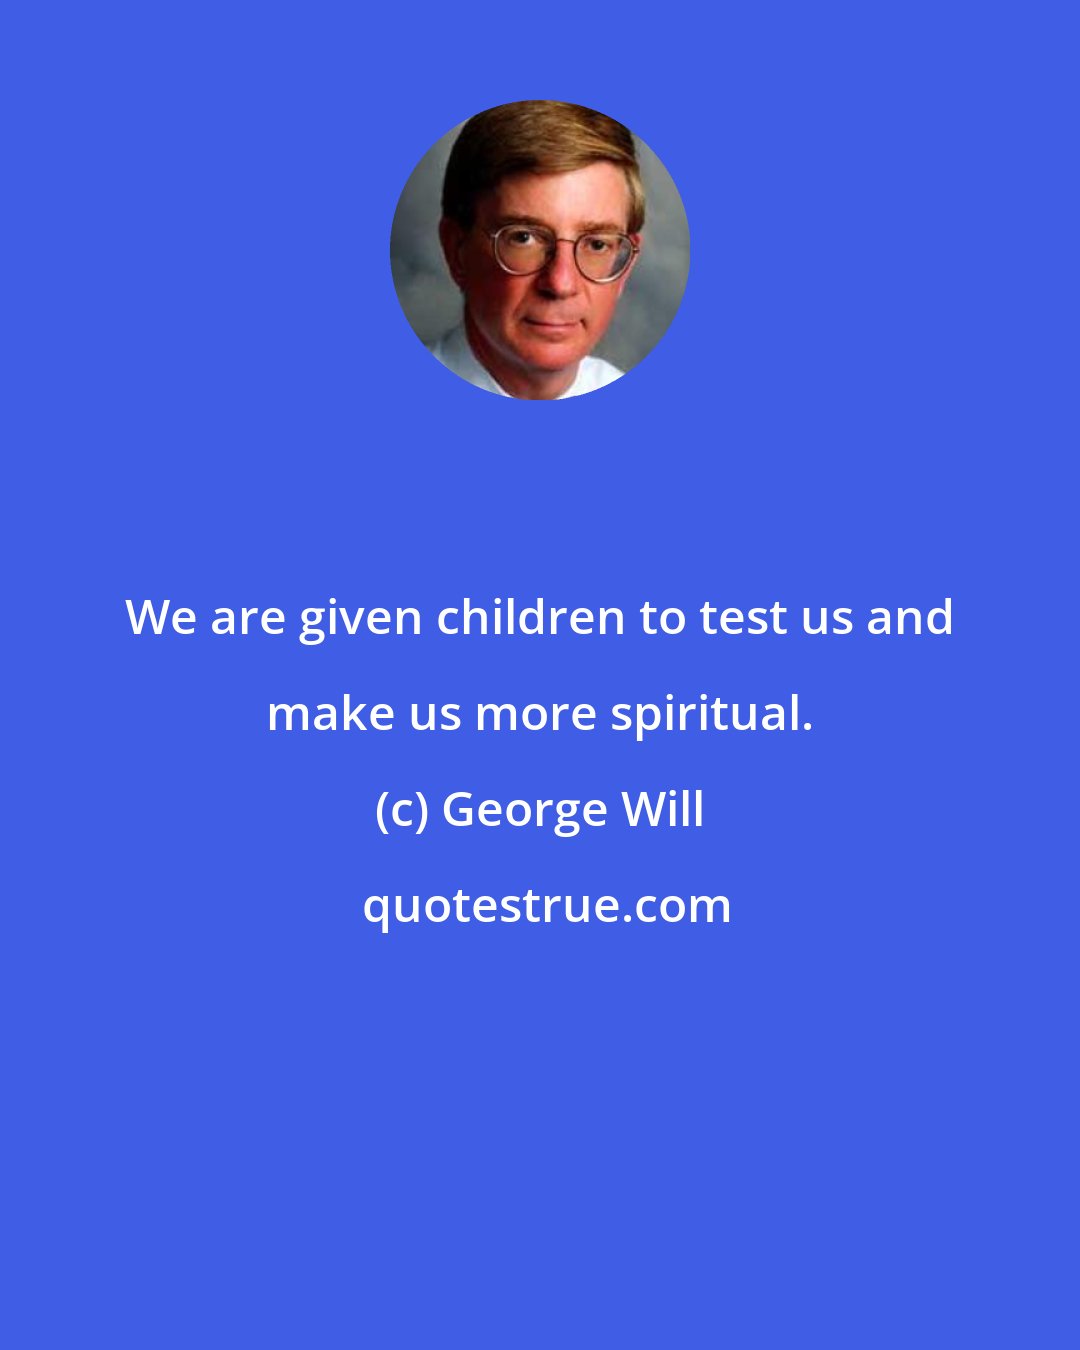 George Will: We are given children to test us and make us more spiritual.